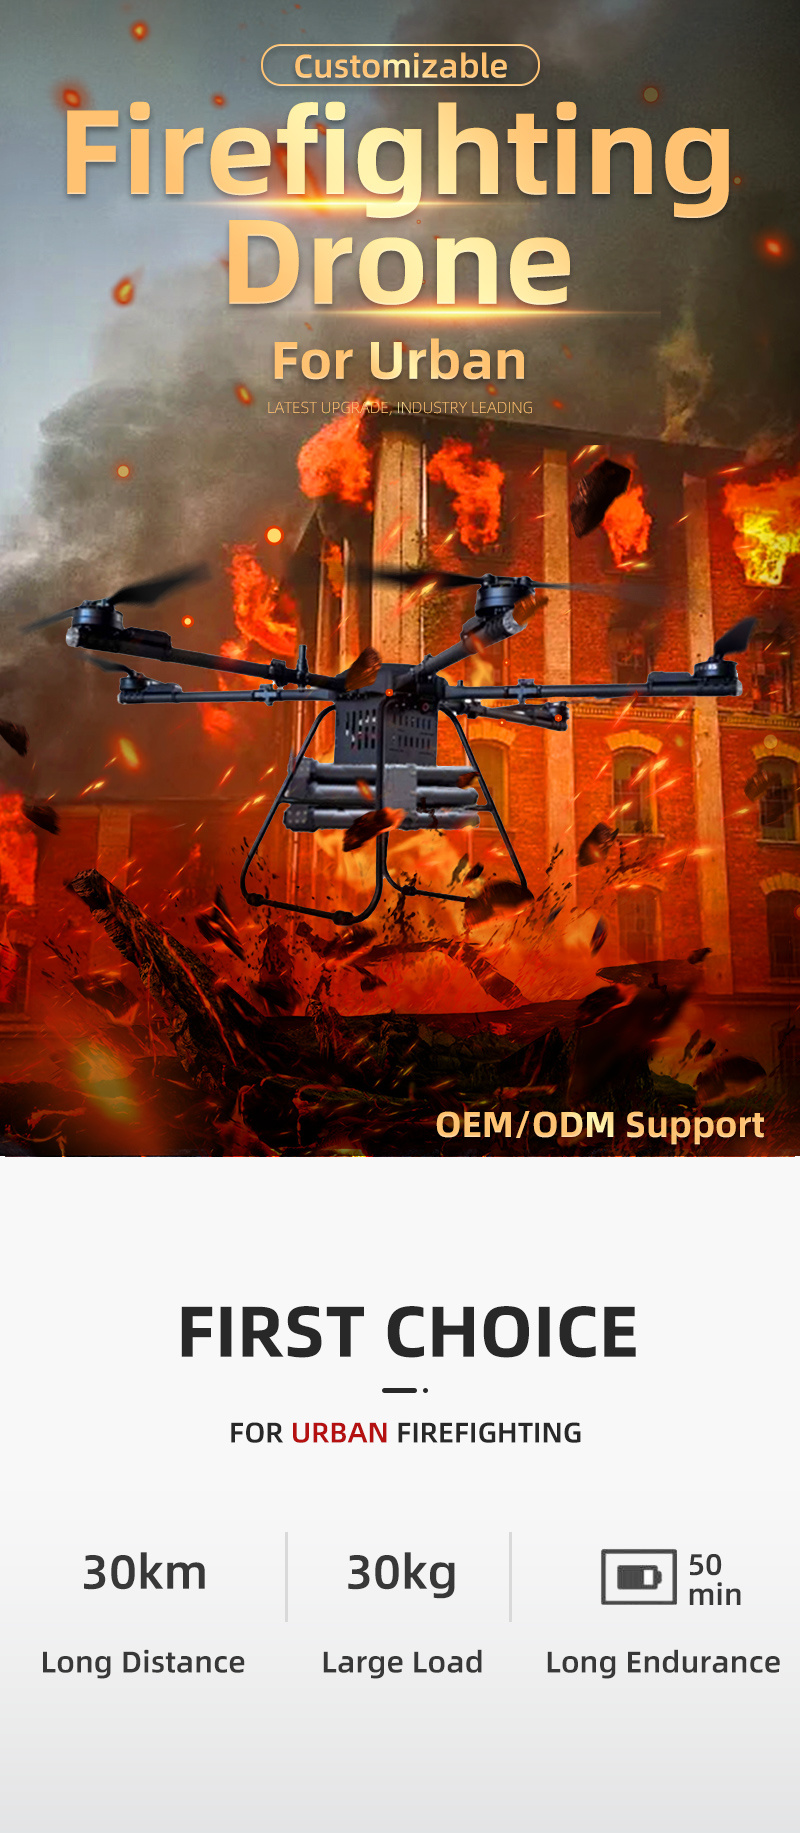 30kg Payload Firefighting Drone with Remote Control